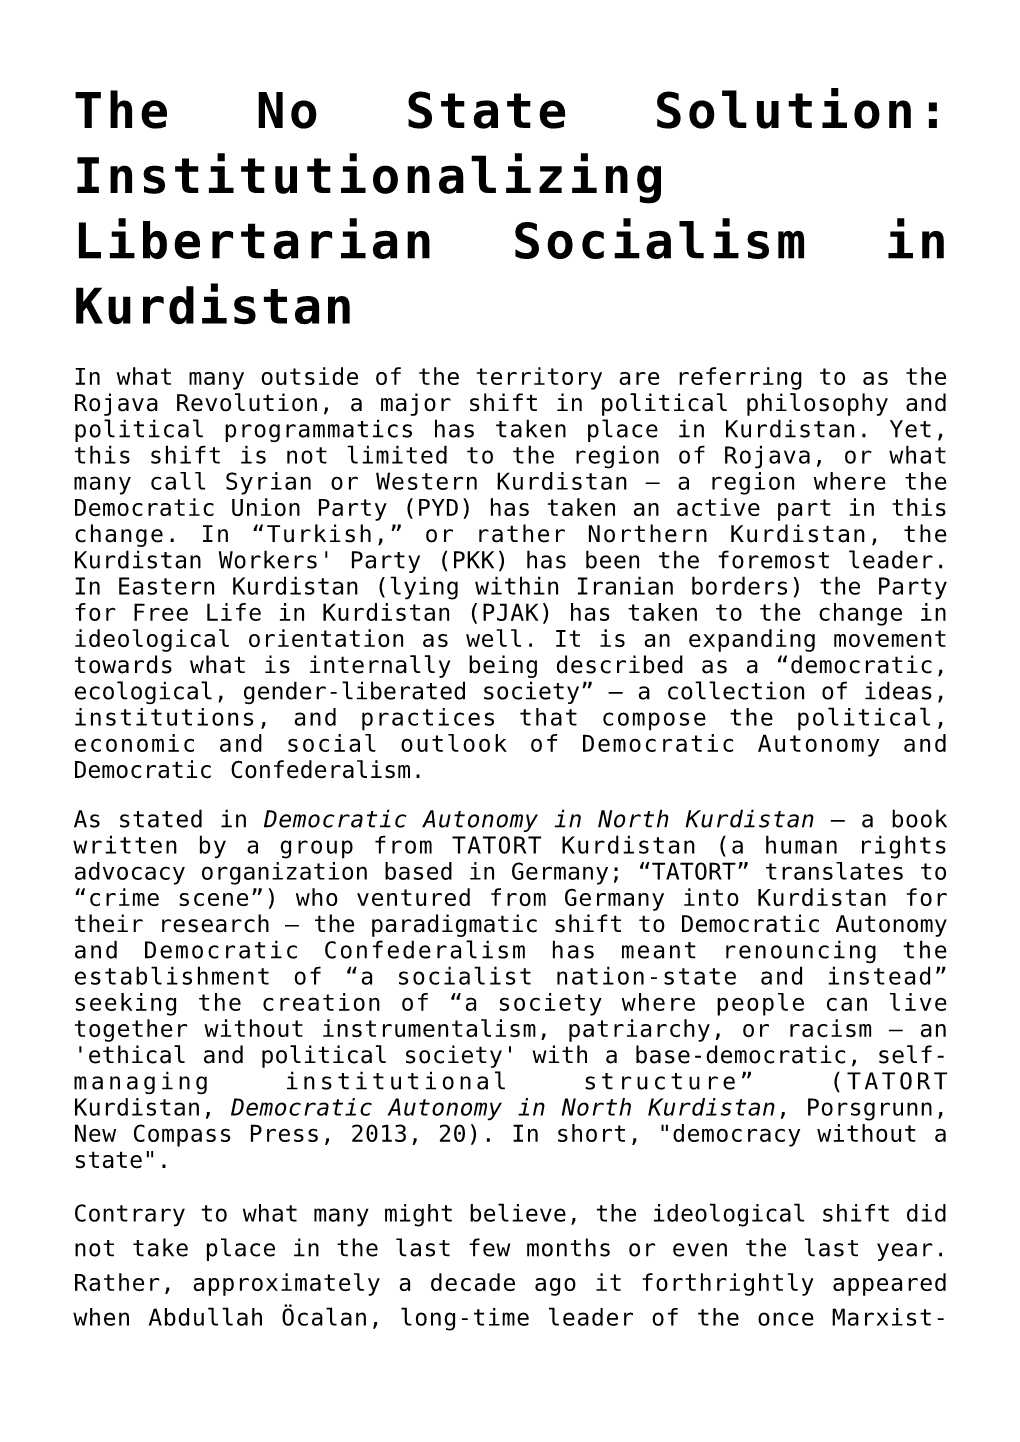 The No State Solution: Institutionalizing Libertarian Socialism in Kurdistan